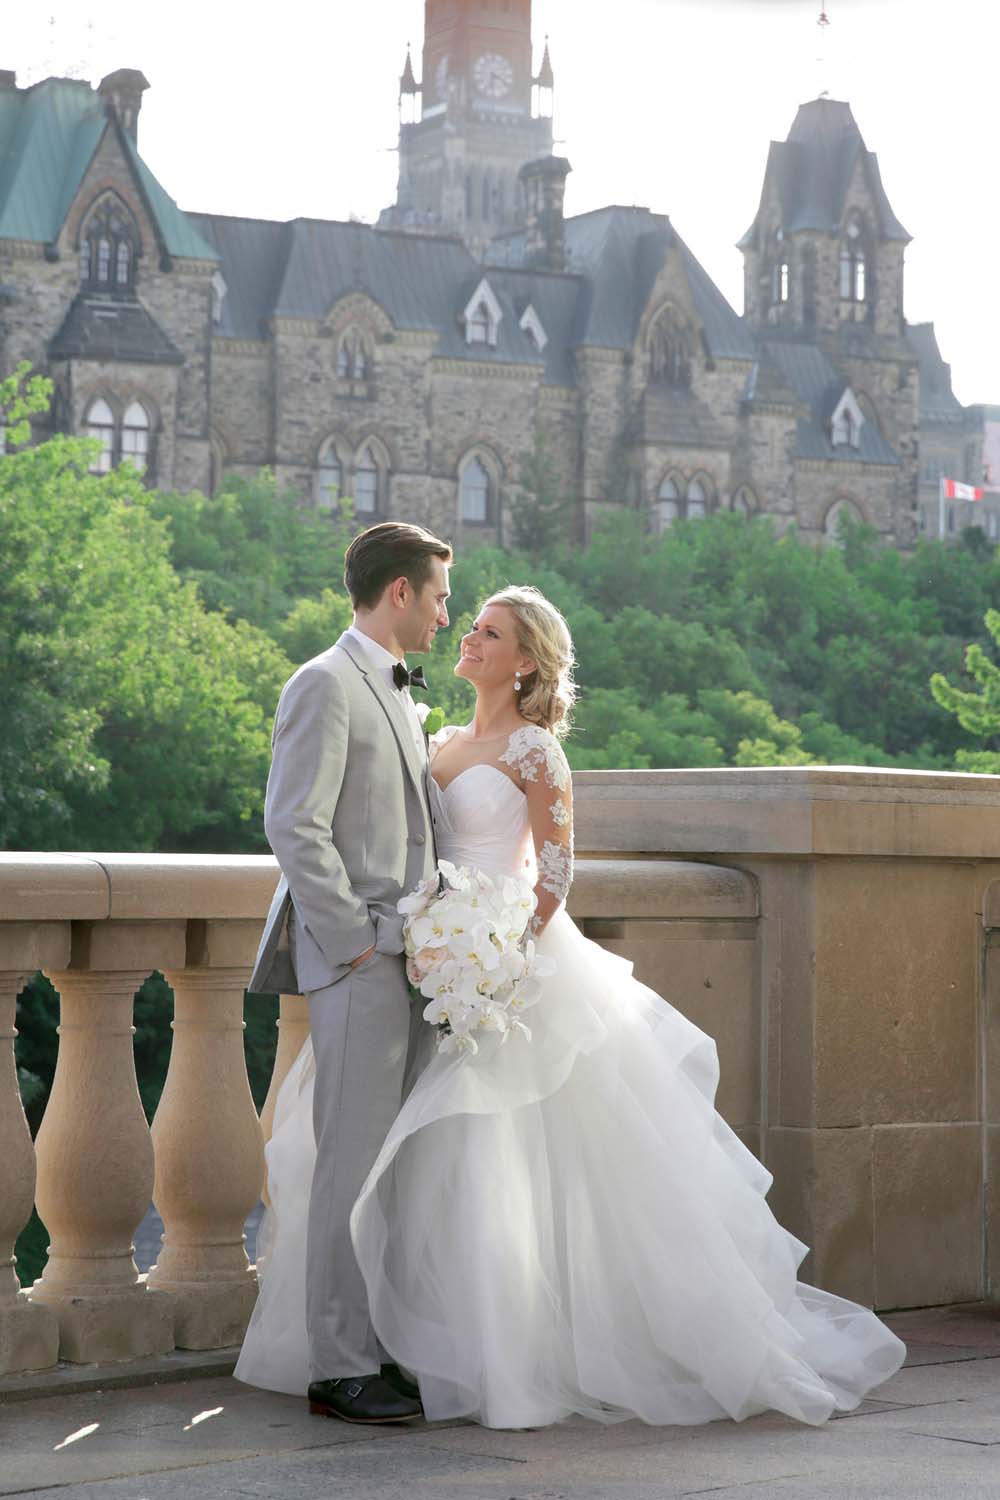 classic luxe wedding in ottawa ontario - bride and groom